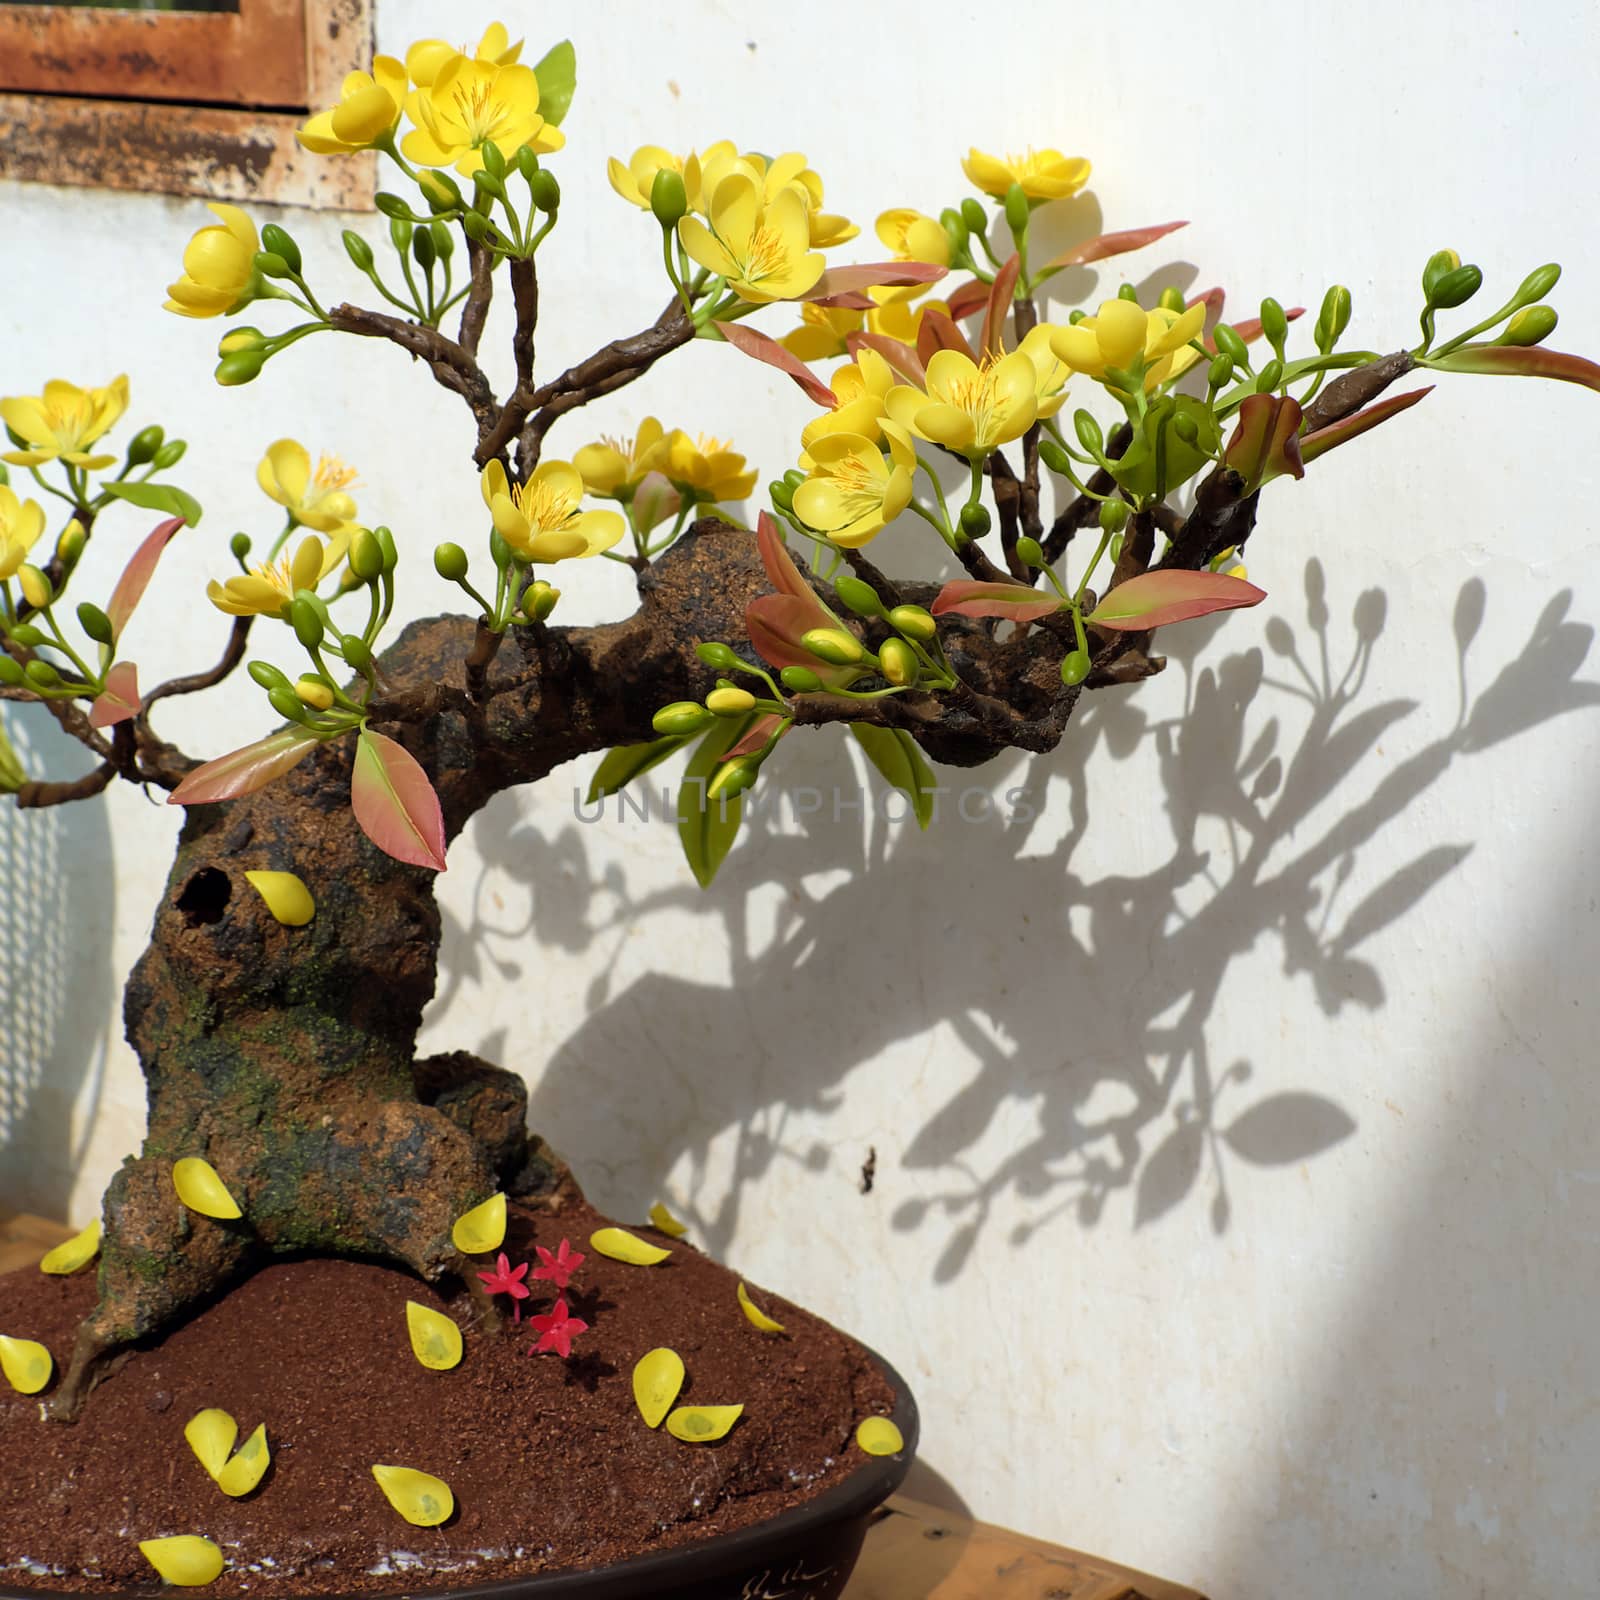 Vietnam spring flower, clay apricot blossom by xuanhuongho